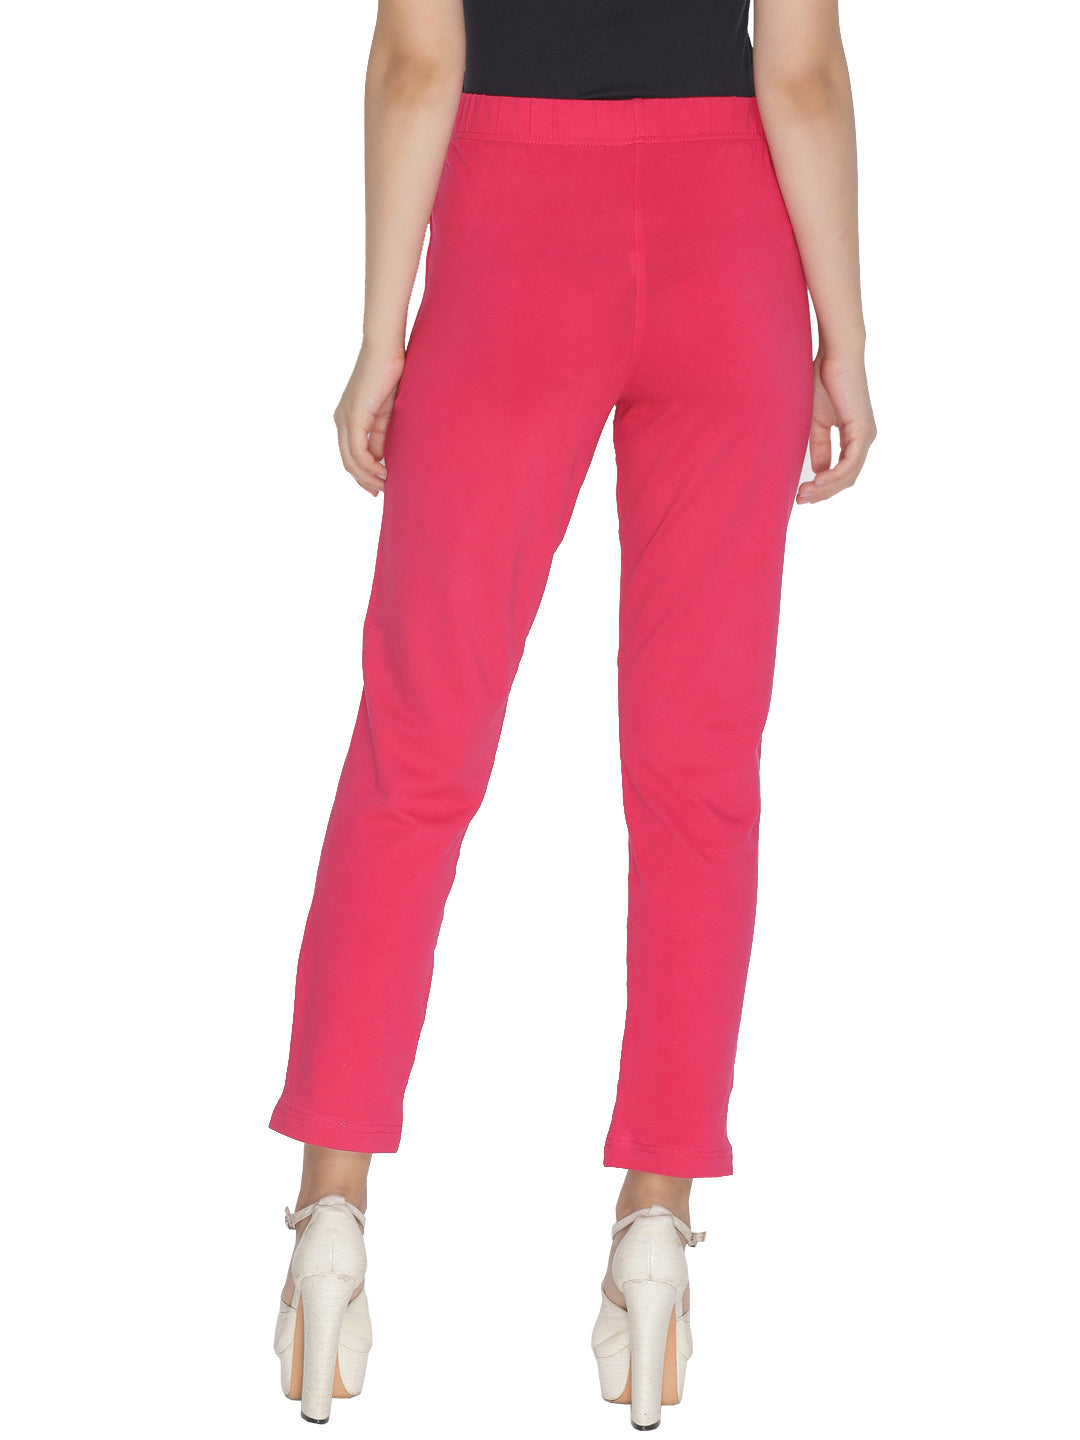 ODD MOLLY Dark Pink Marion Flared Sweat Pants Trousers Size 1 / S | eBay